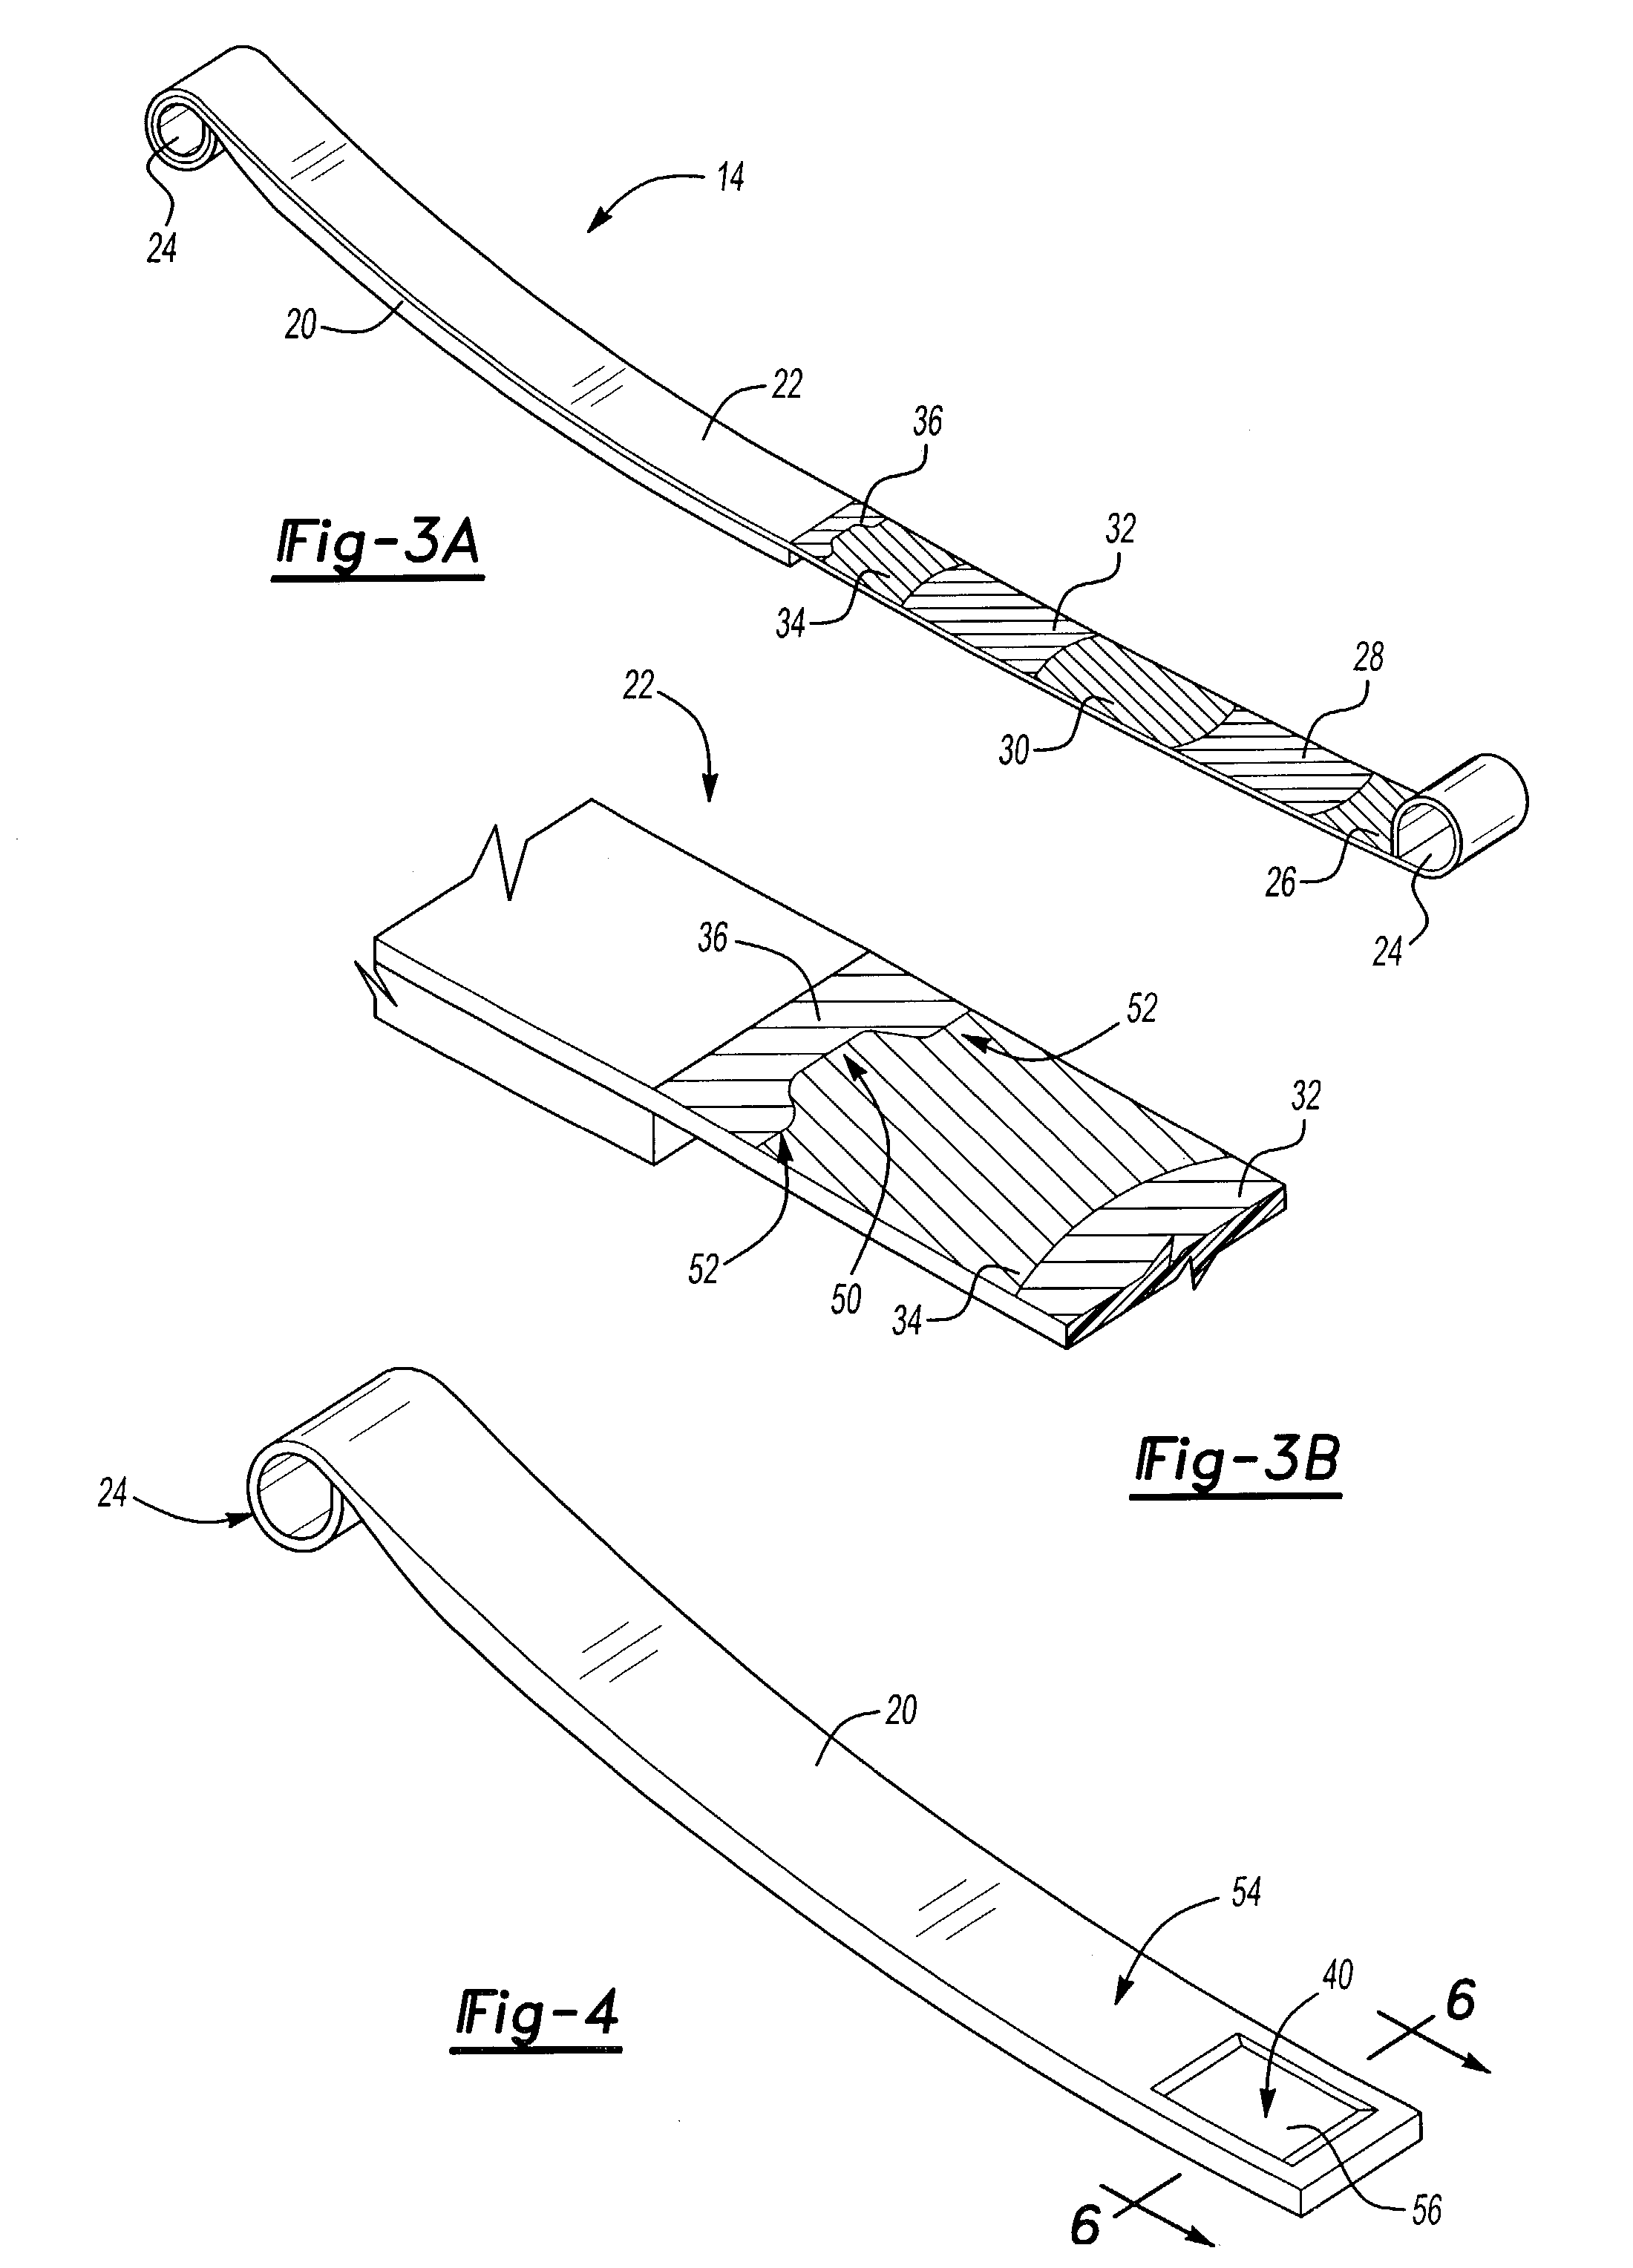 Method for relieving spring seat mounting stresses